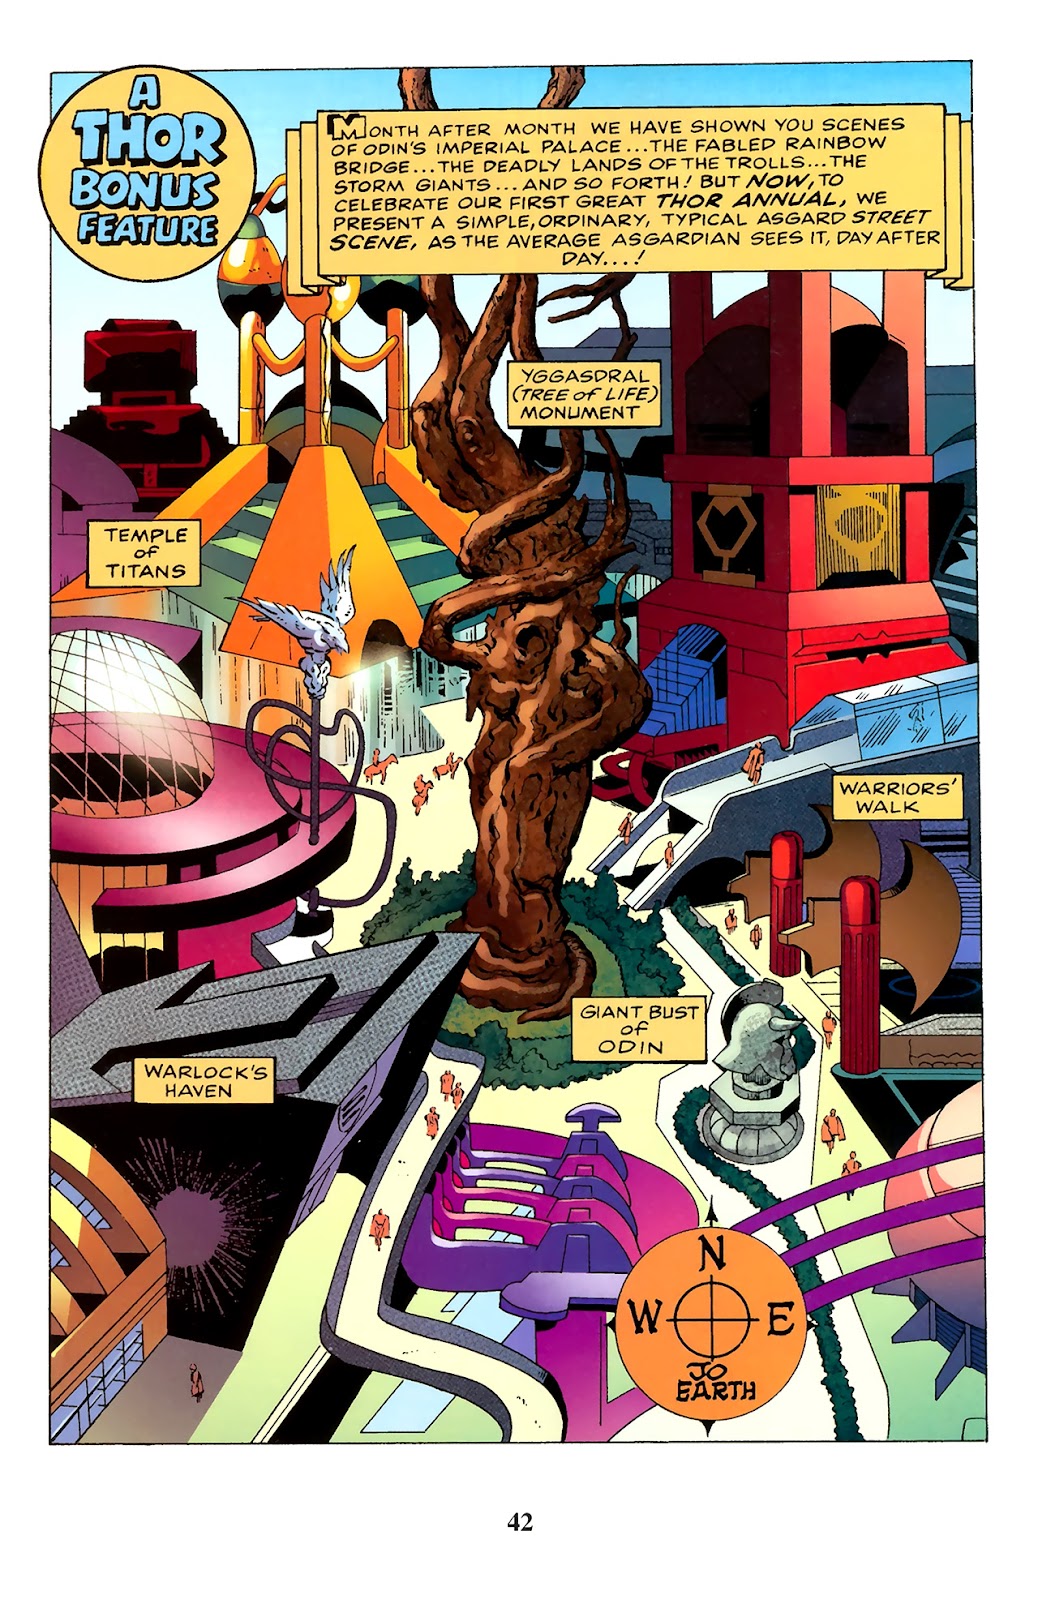 Thor: Tales of Asgard by Stan Lee & Jack Kirby issue 3 - Page 44